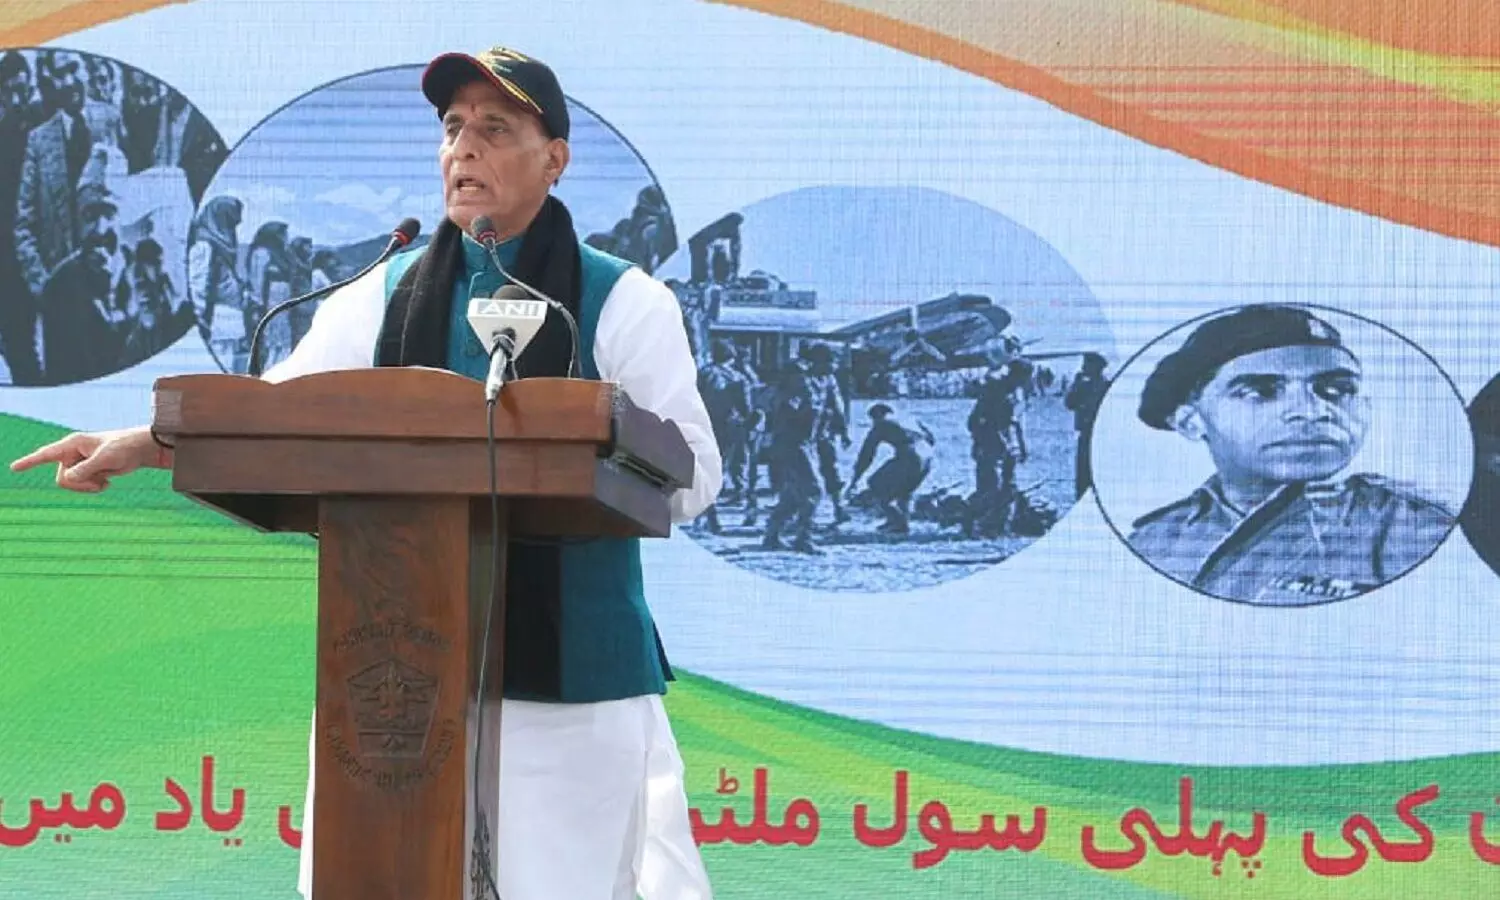 himachal election 2022 rajnath singh said ucc will be implemented as soon as govt formed in himachal